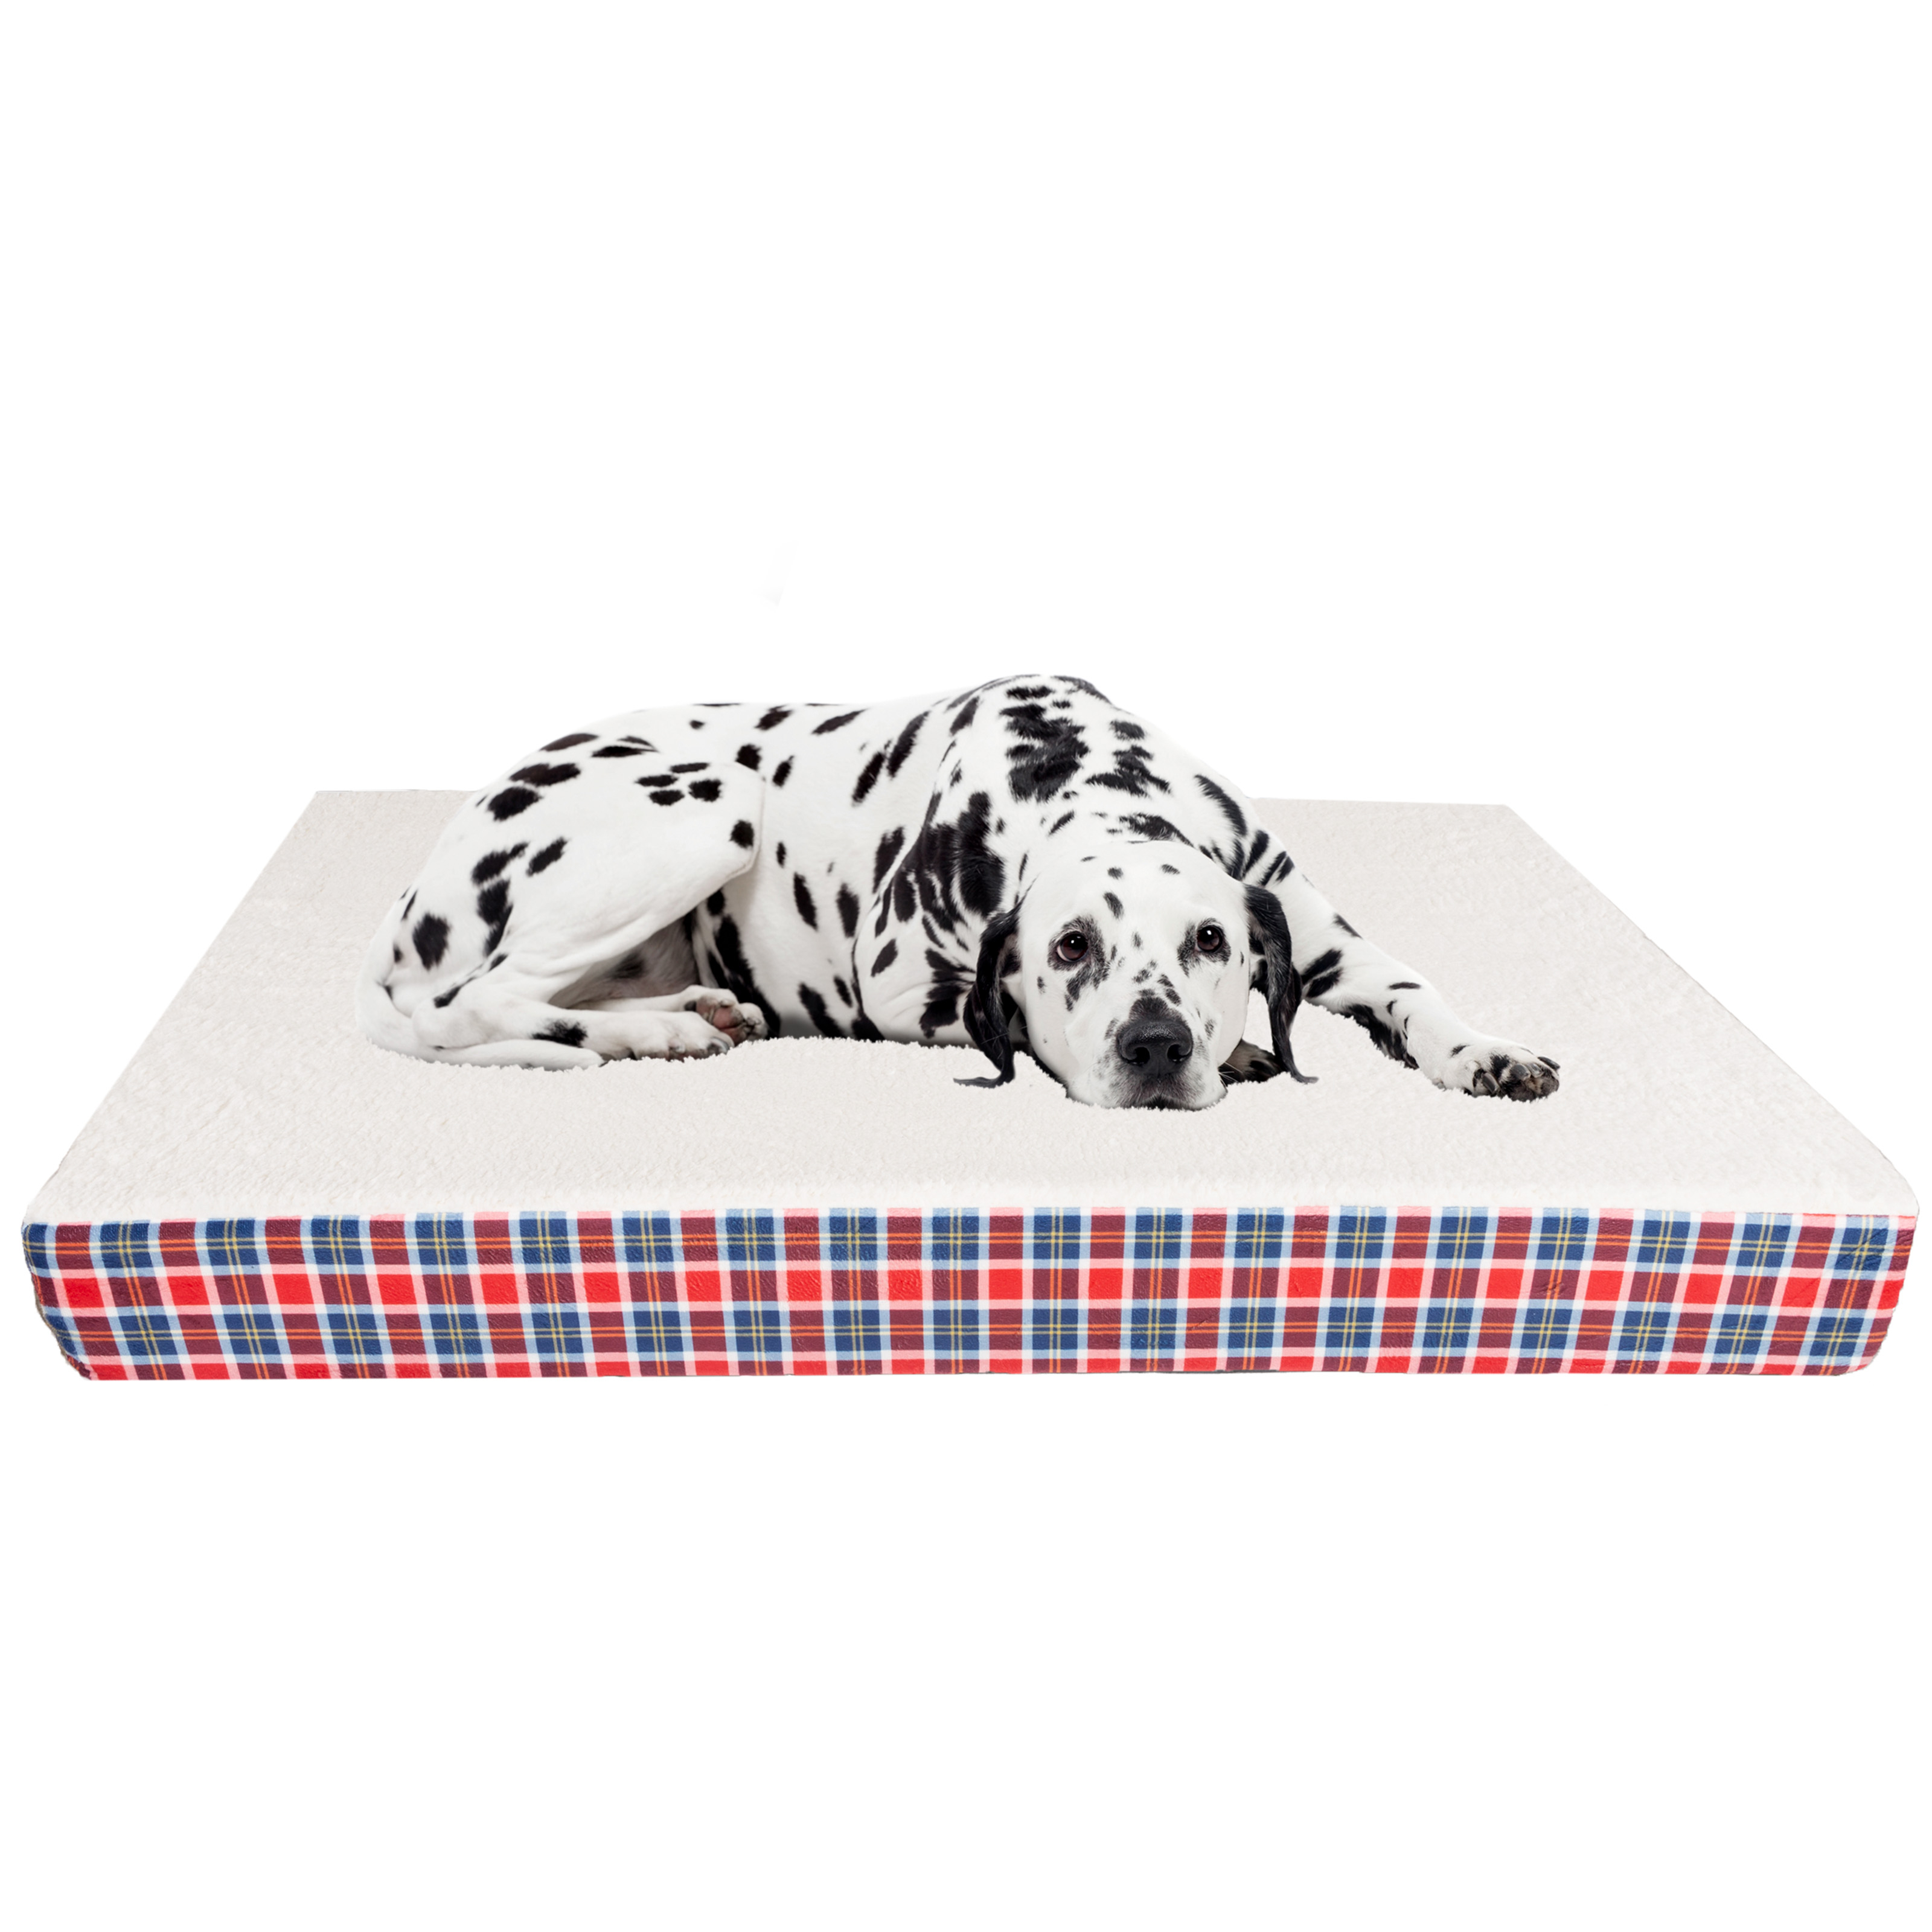 Orthopedic Dog Bed With Memory Foam And Sherpa Top Â Removable, Machine Washable Cover Â 44 X 36.5 X 4.5 Pet Bed By Petmaker Americana Plaid